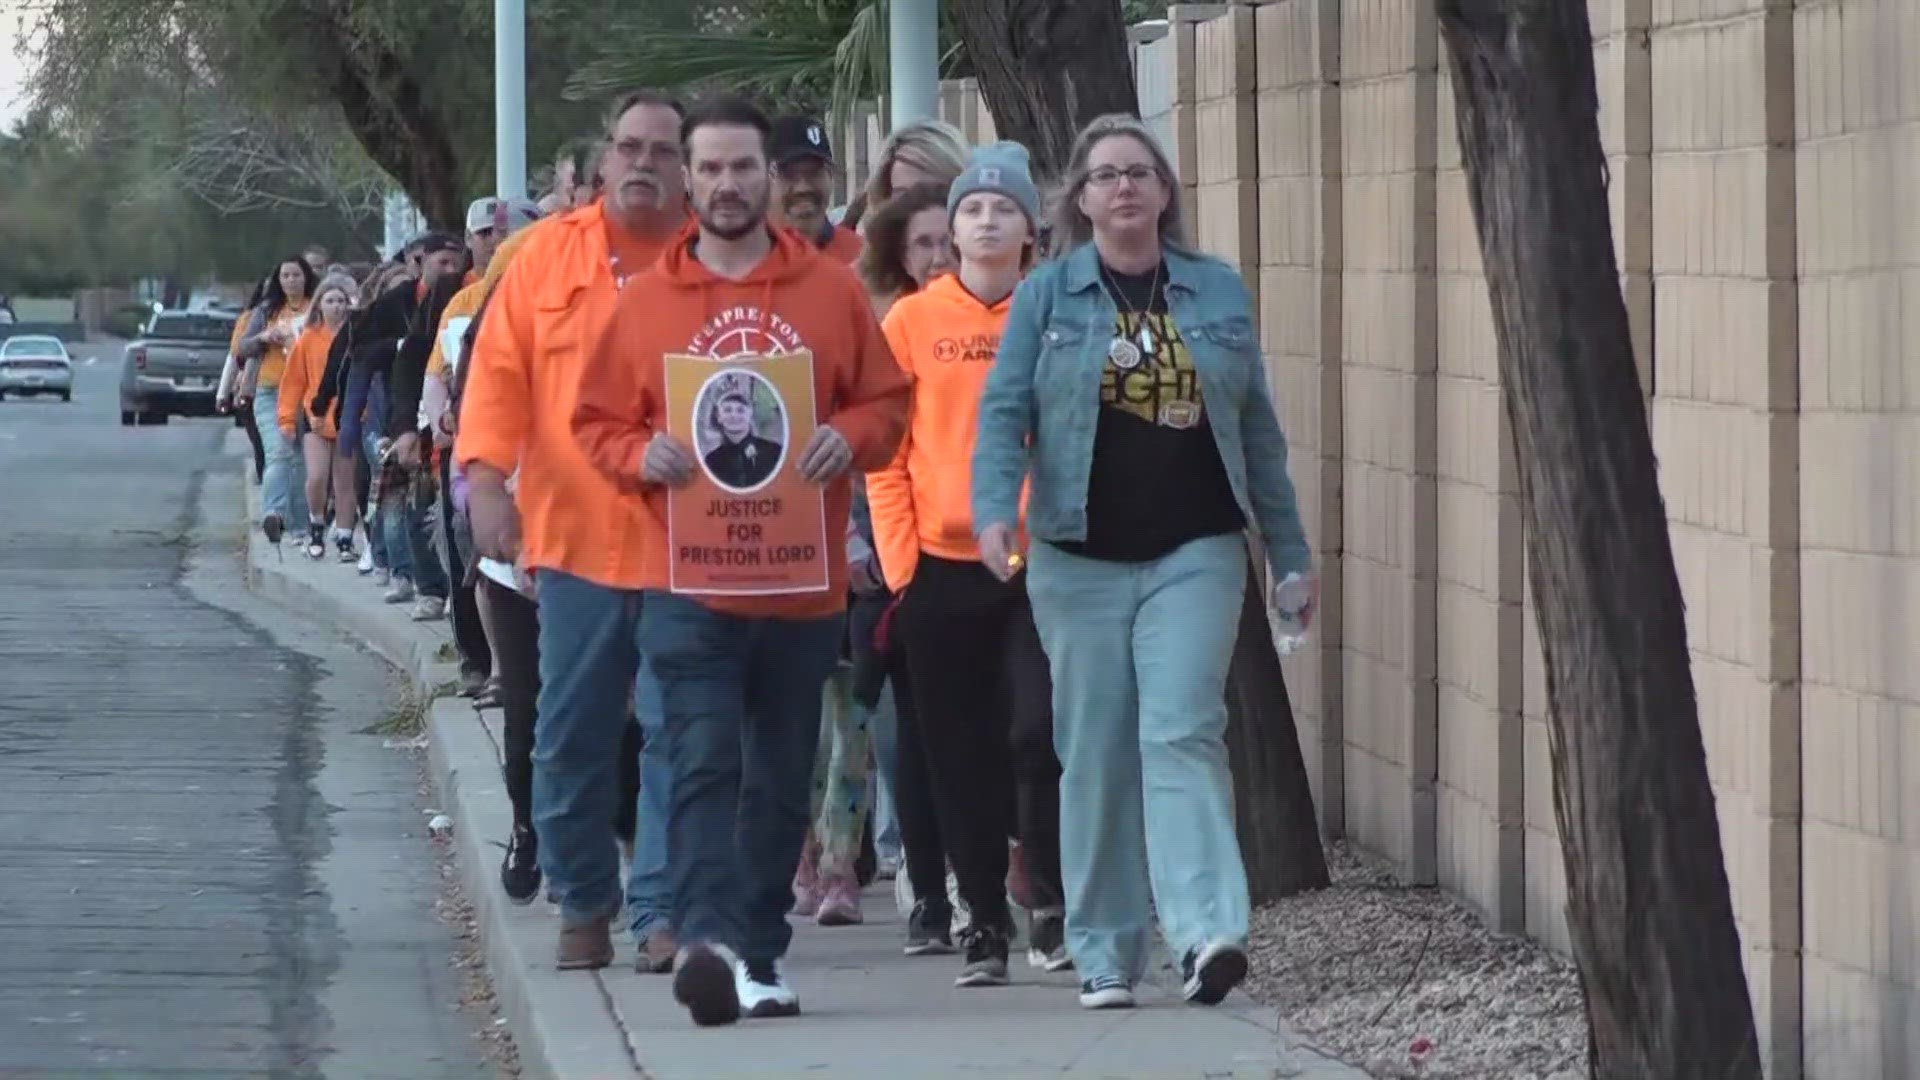 Dozens of people wearing orange walked around the Chandler Unified School District building ahead of a board meeting where they demanded change.